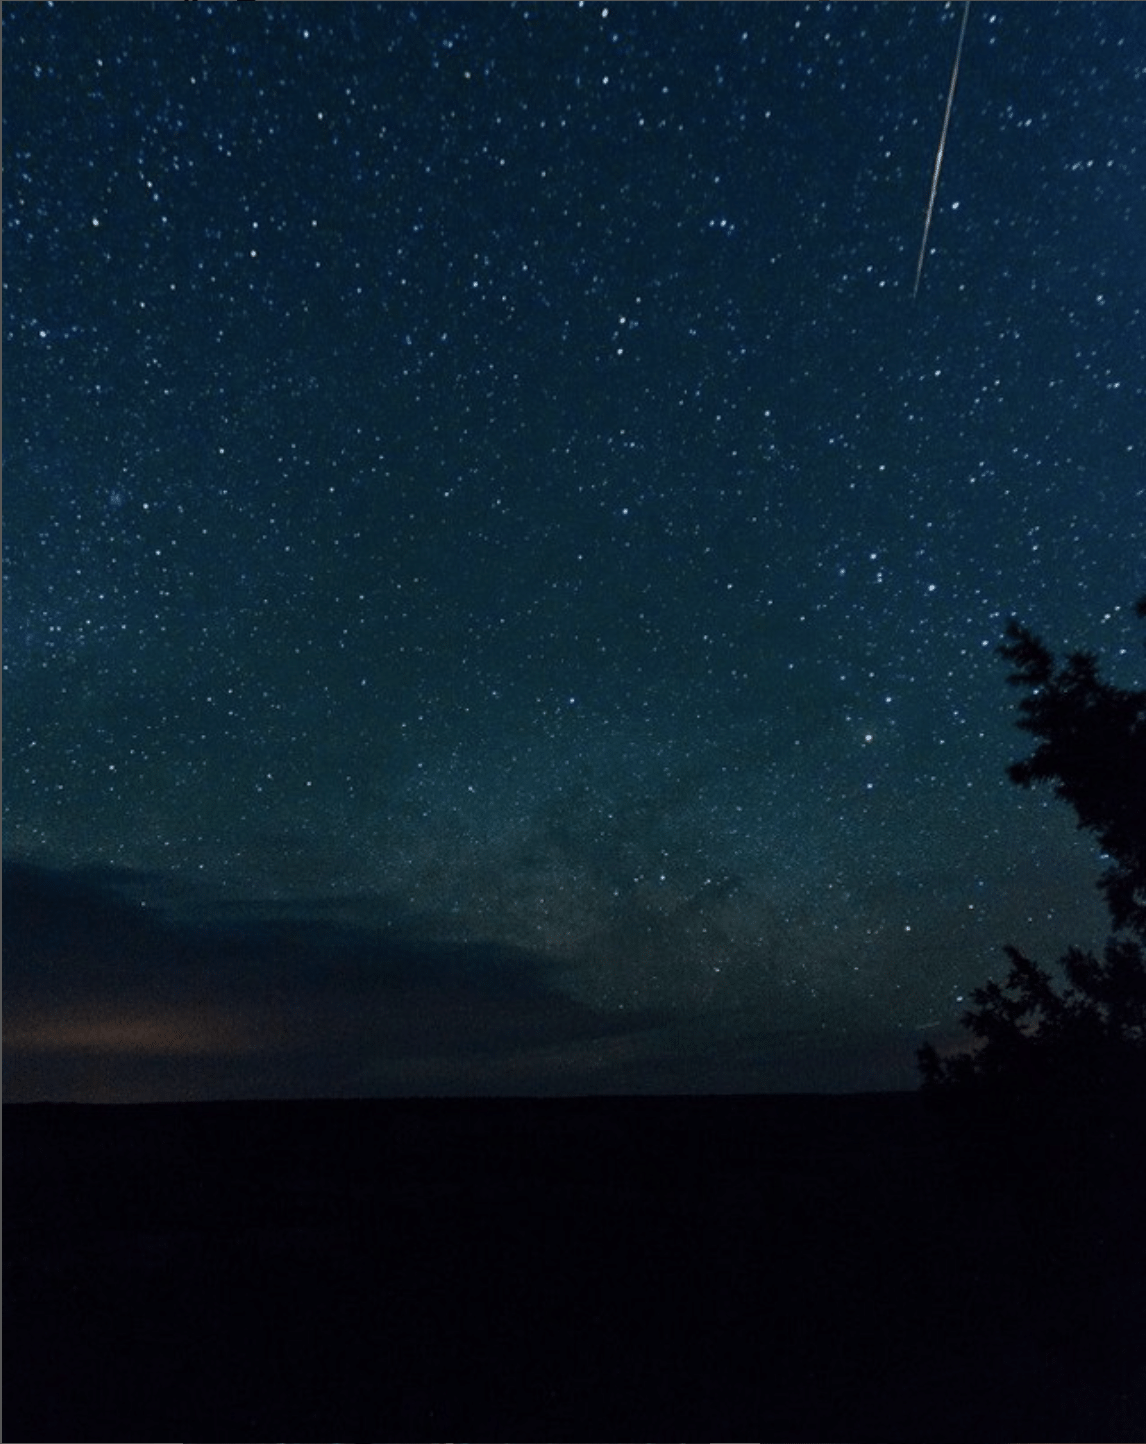 Eta Aquarids: record of meteor shower by Halley comet in Arizona / USA - Charles Byrne